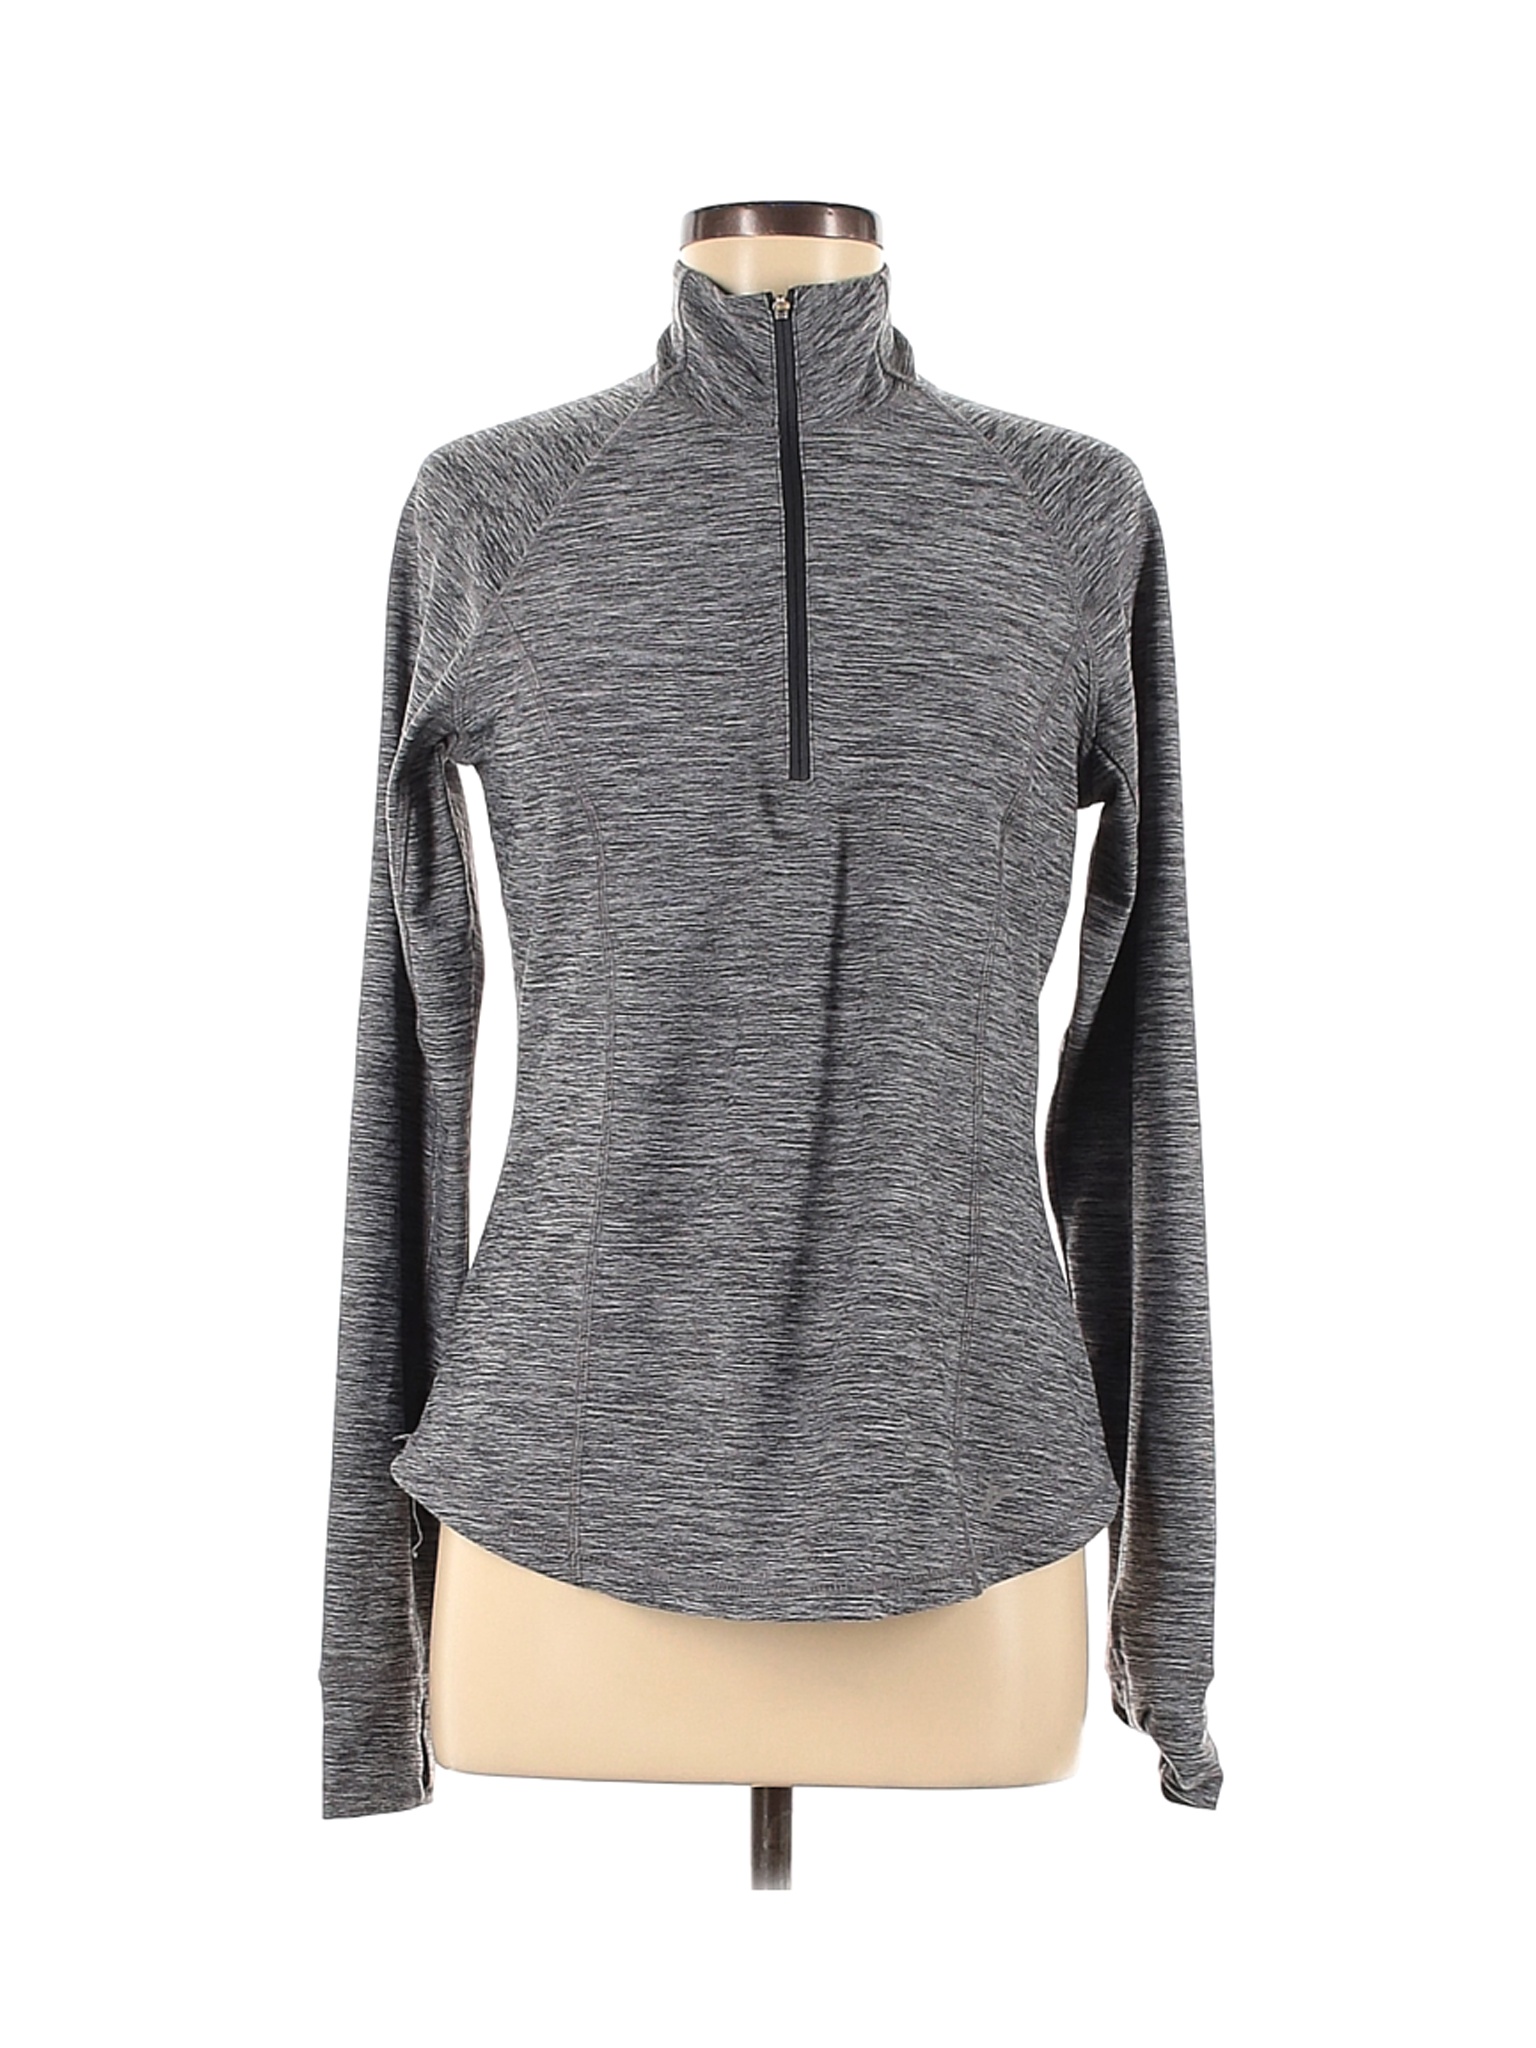 Active by Old Navy Women Gray Track Jacket M | eBay